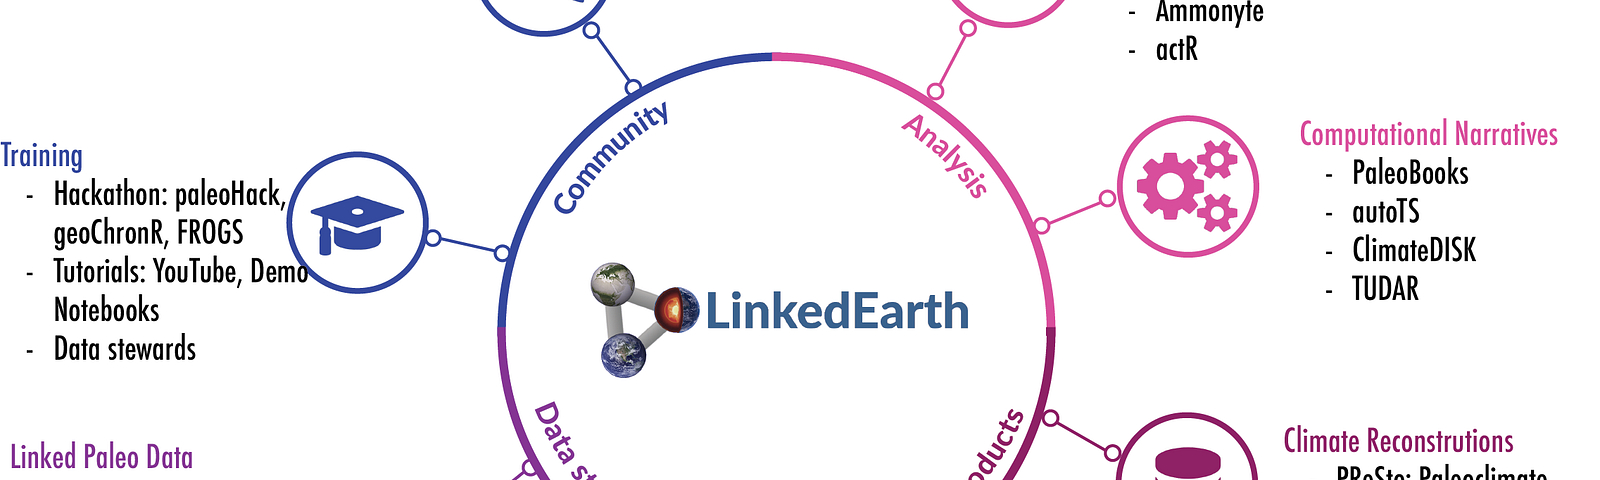 A diagram showcasing LinkedEarth activities along four main branches: Analysis, Data Products, Data Stewardship and Community. FROGS enhances the community aspect of LinkedEarth, in particular, its training activities.